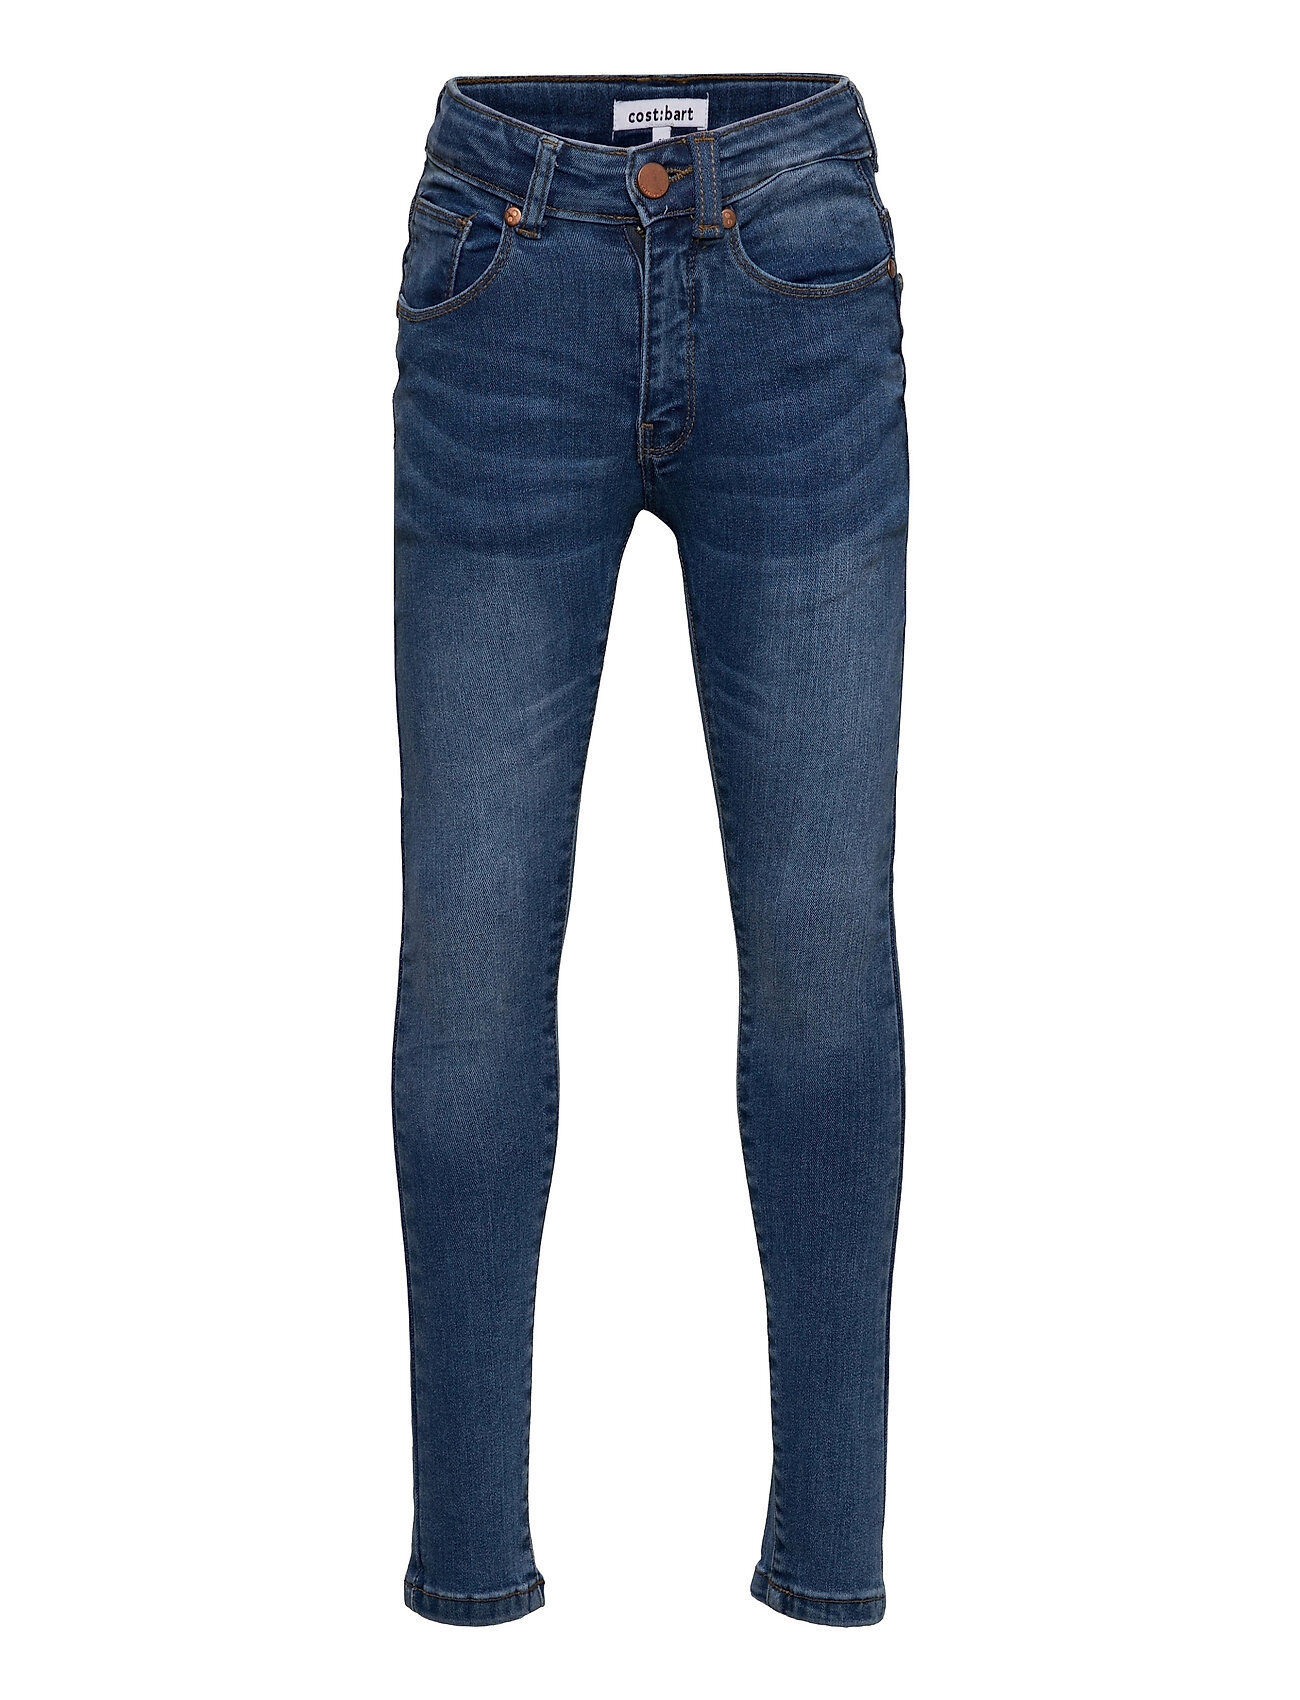 Costbart Jowie Jeans Skinny Fit Jeans Blå Costbart